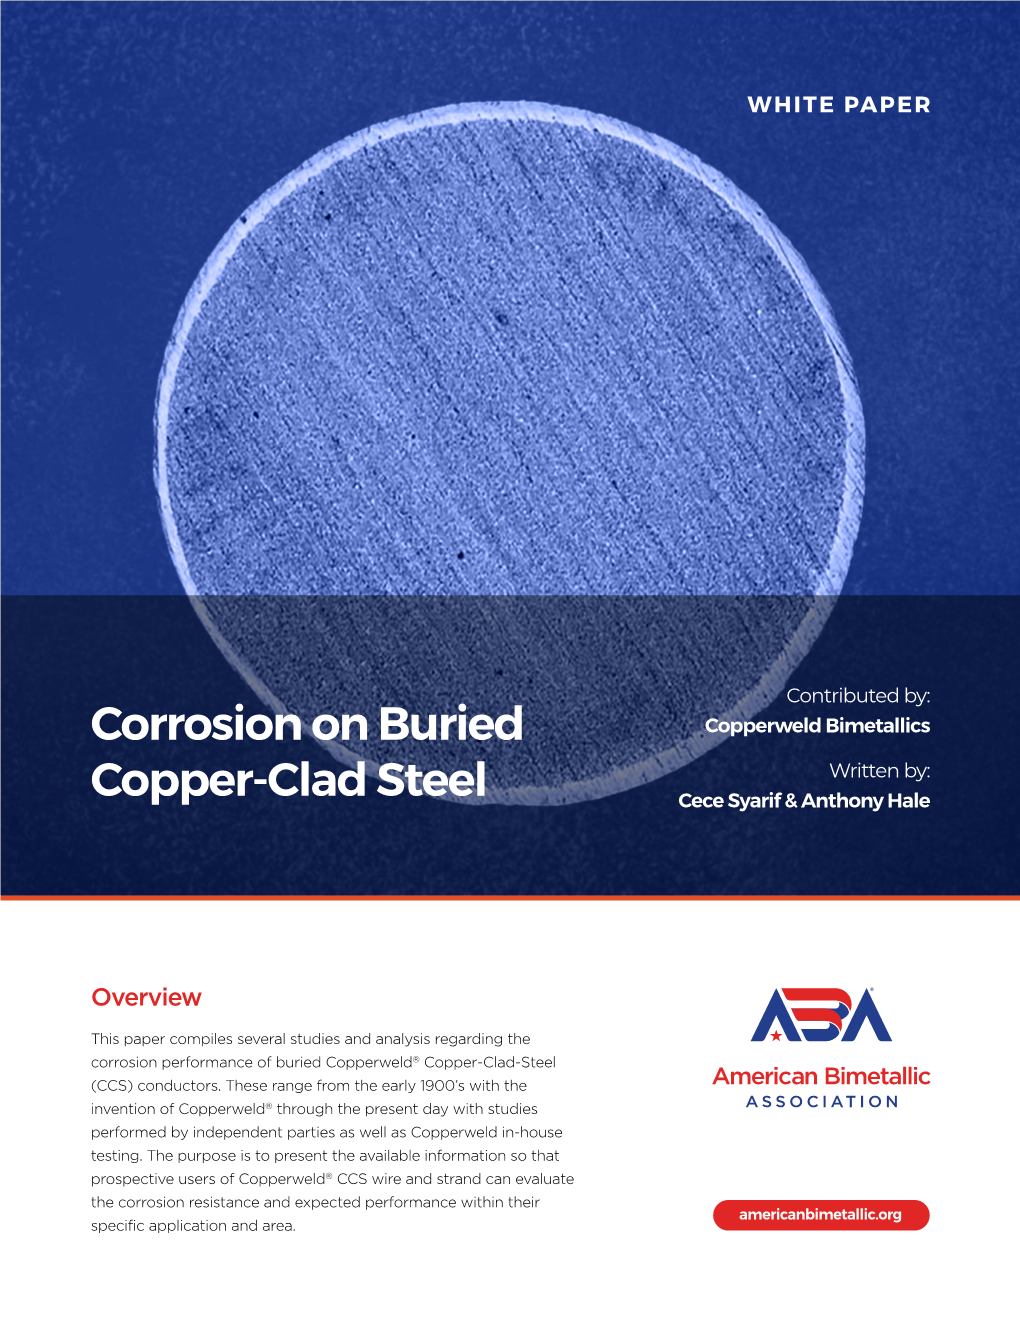 Corrosion on Buried Copper-Clad Steel